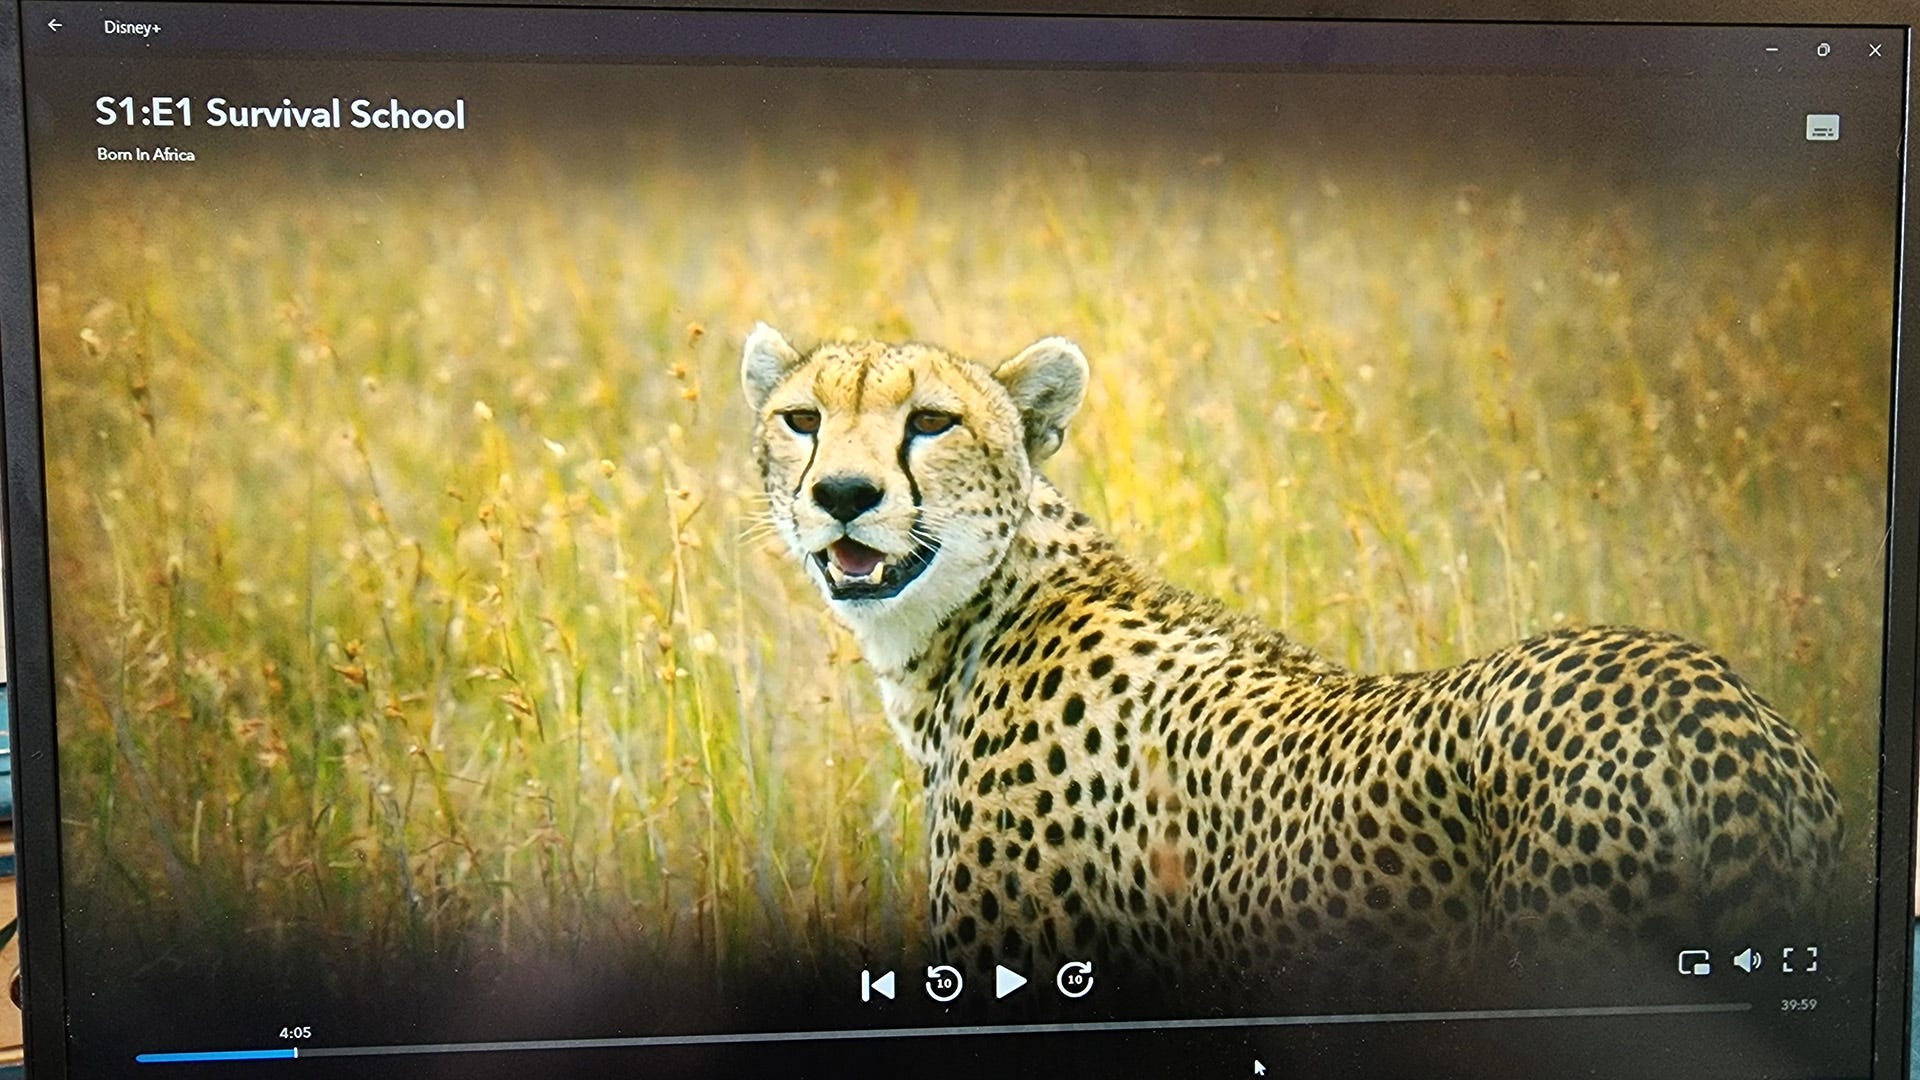 an image of a cheetah in the wild.